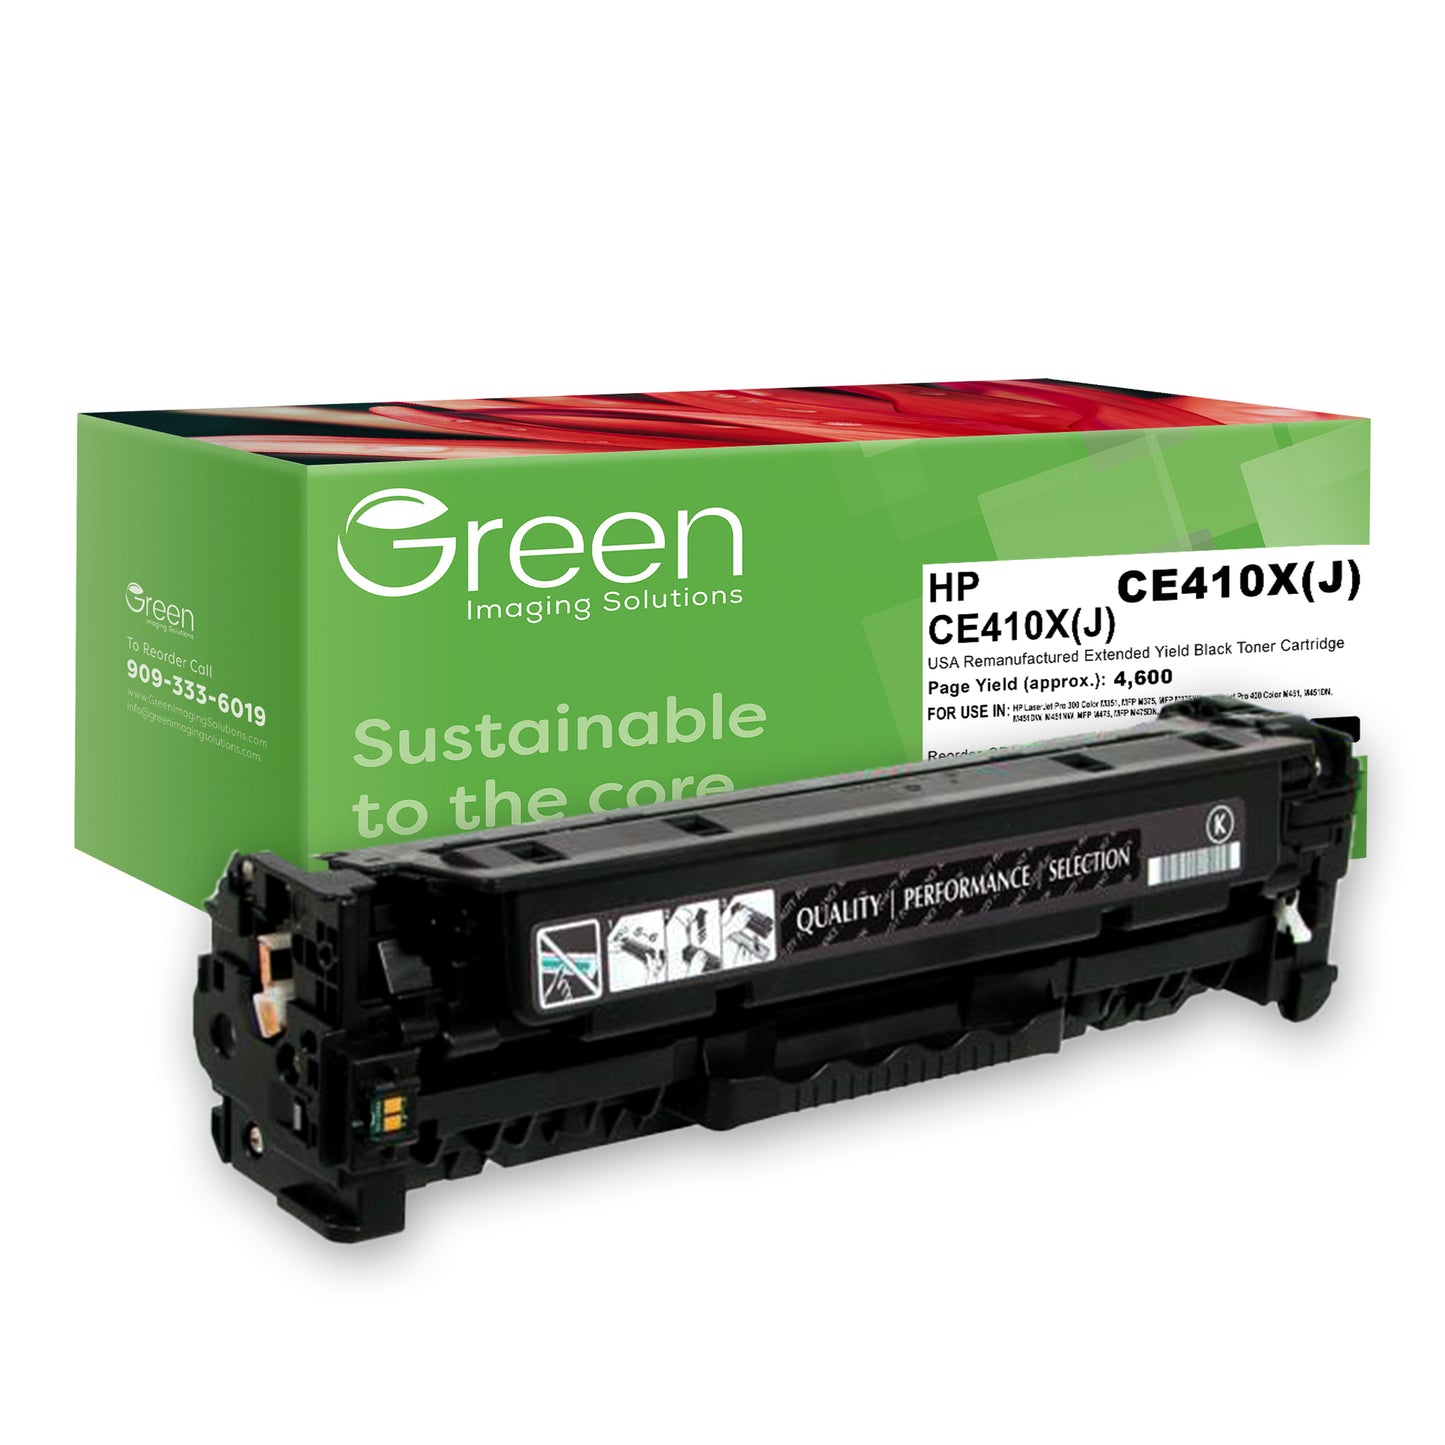 GIS USA Remanufactured Extended Yield Black Toner Cartridge for HP CE410X (HP 305X)